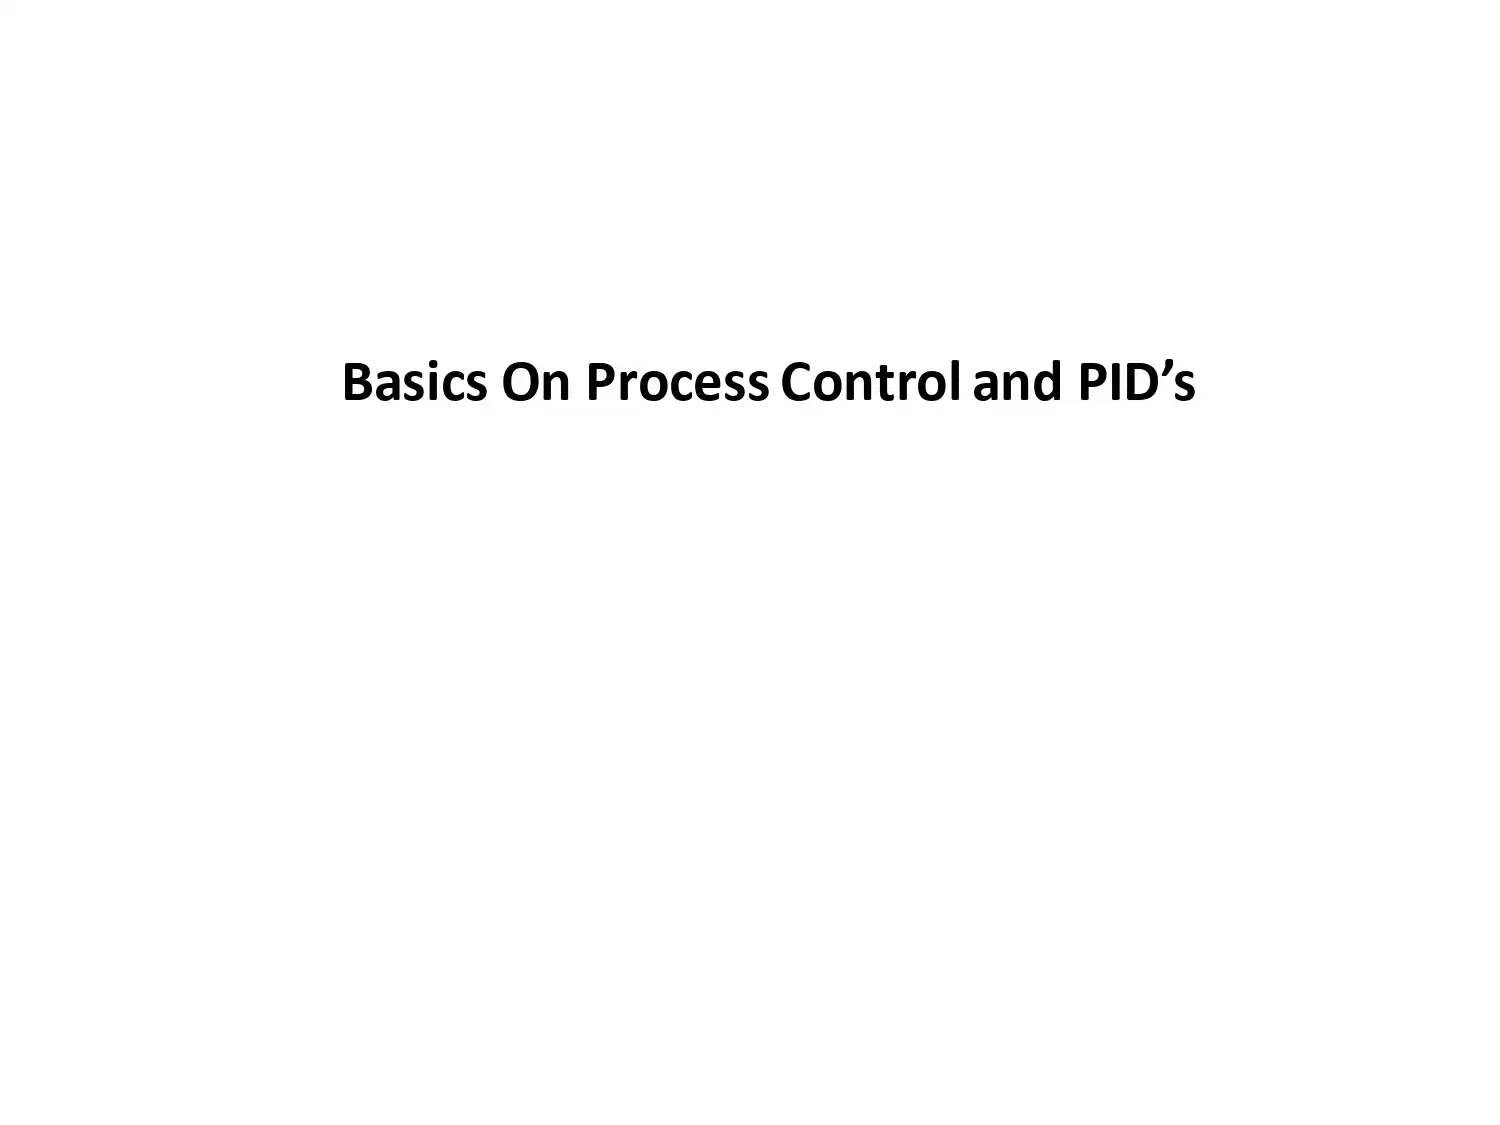 Basics On Process Control and PID's